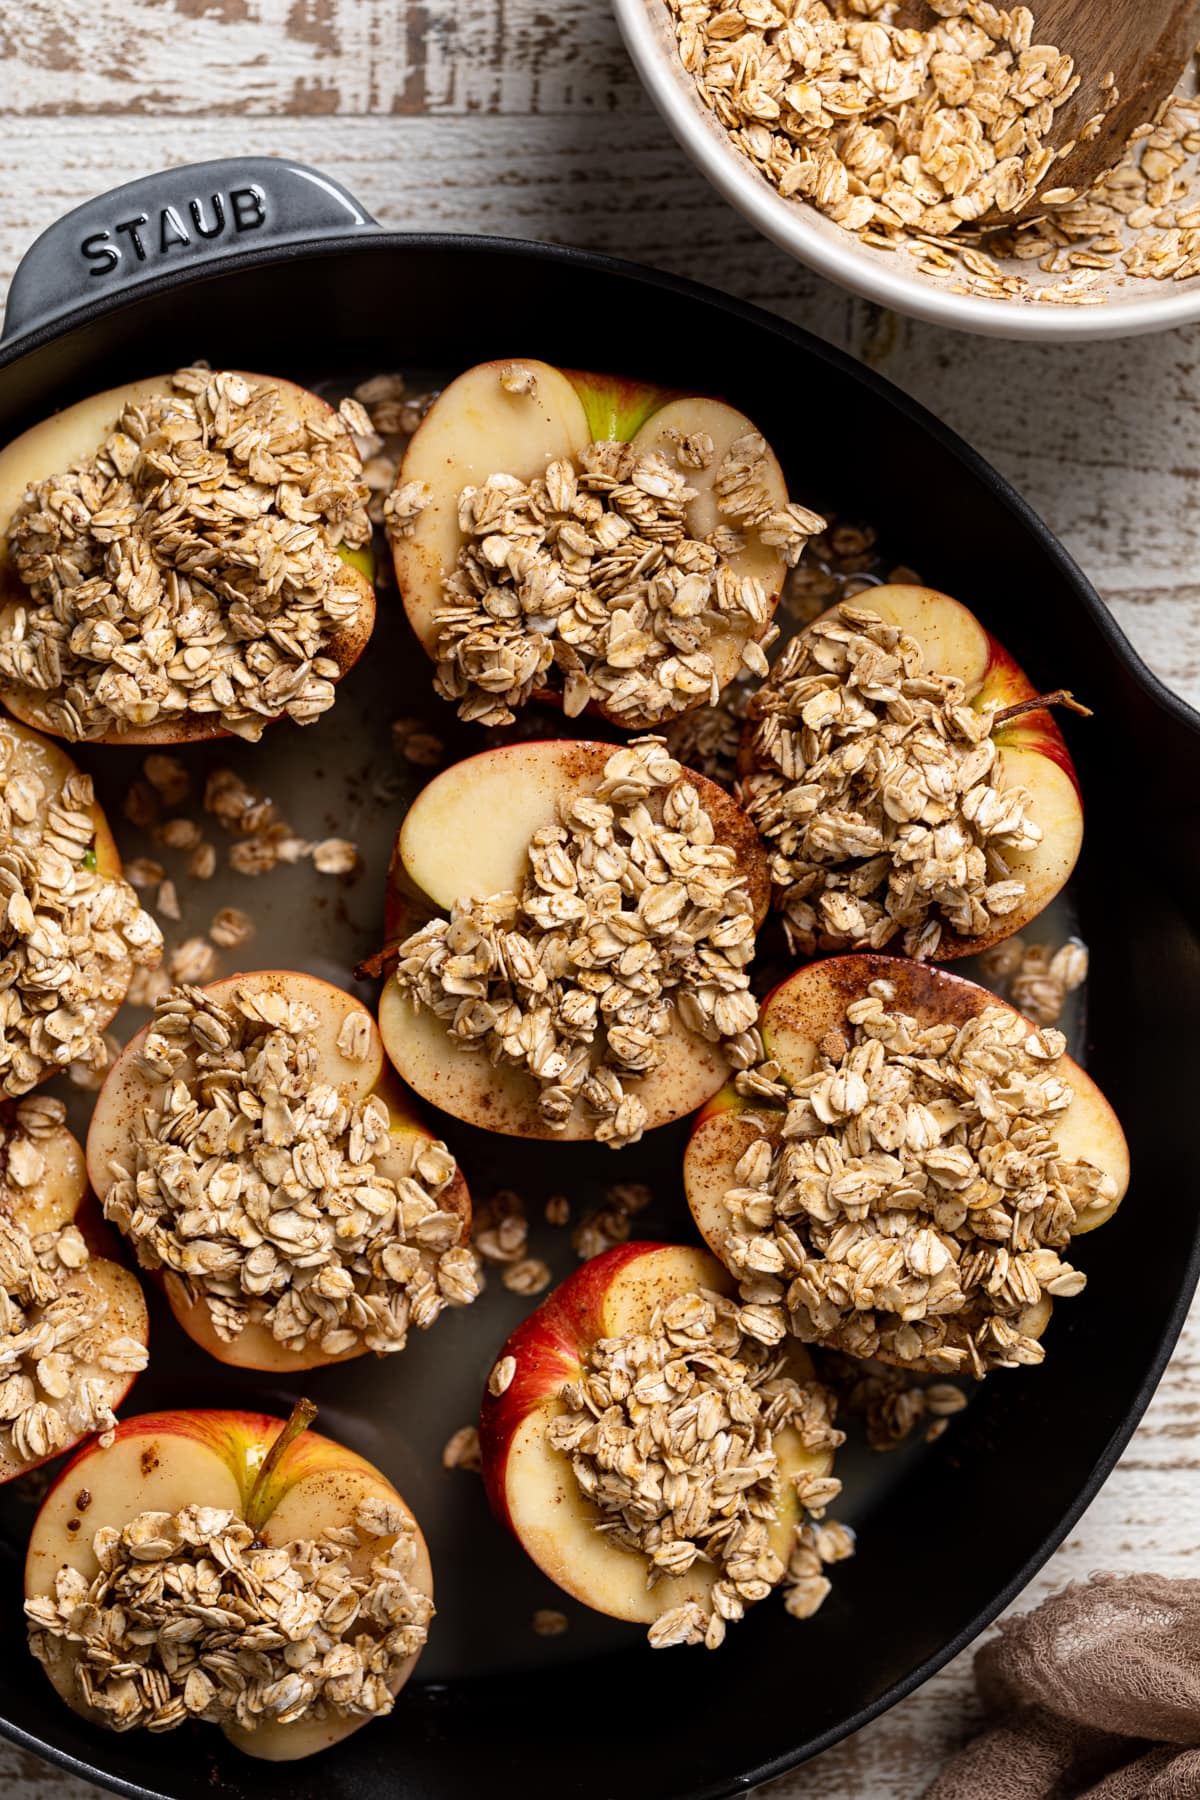 Skillet of halved apples topped with spiced oats.